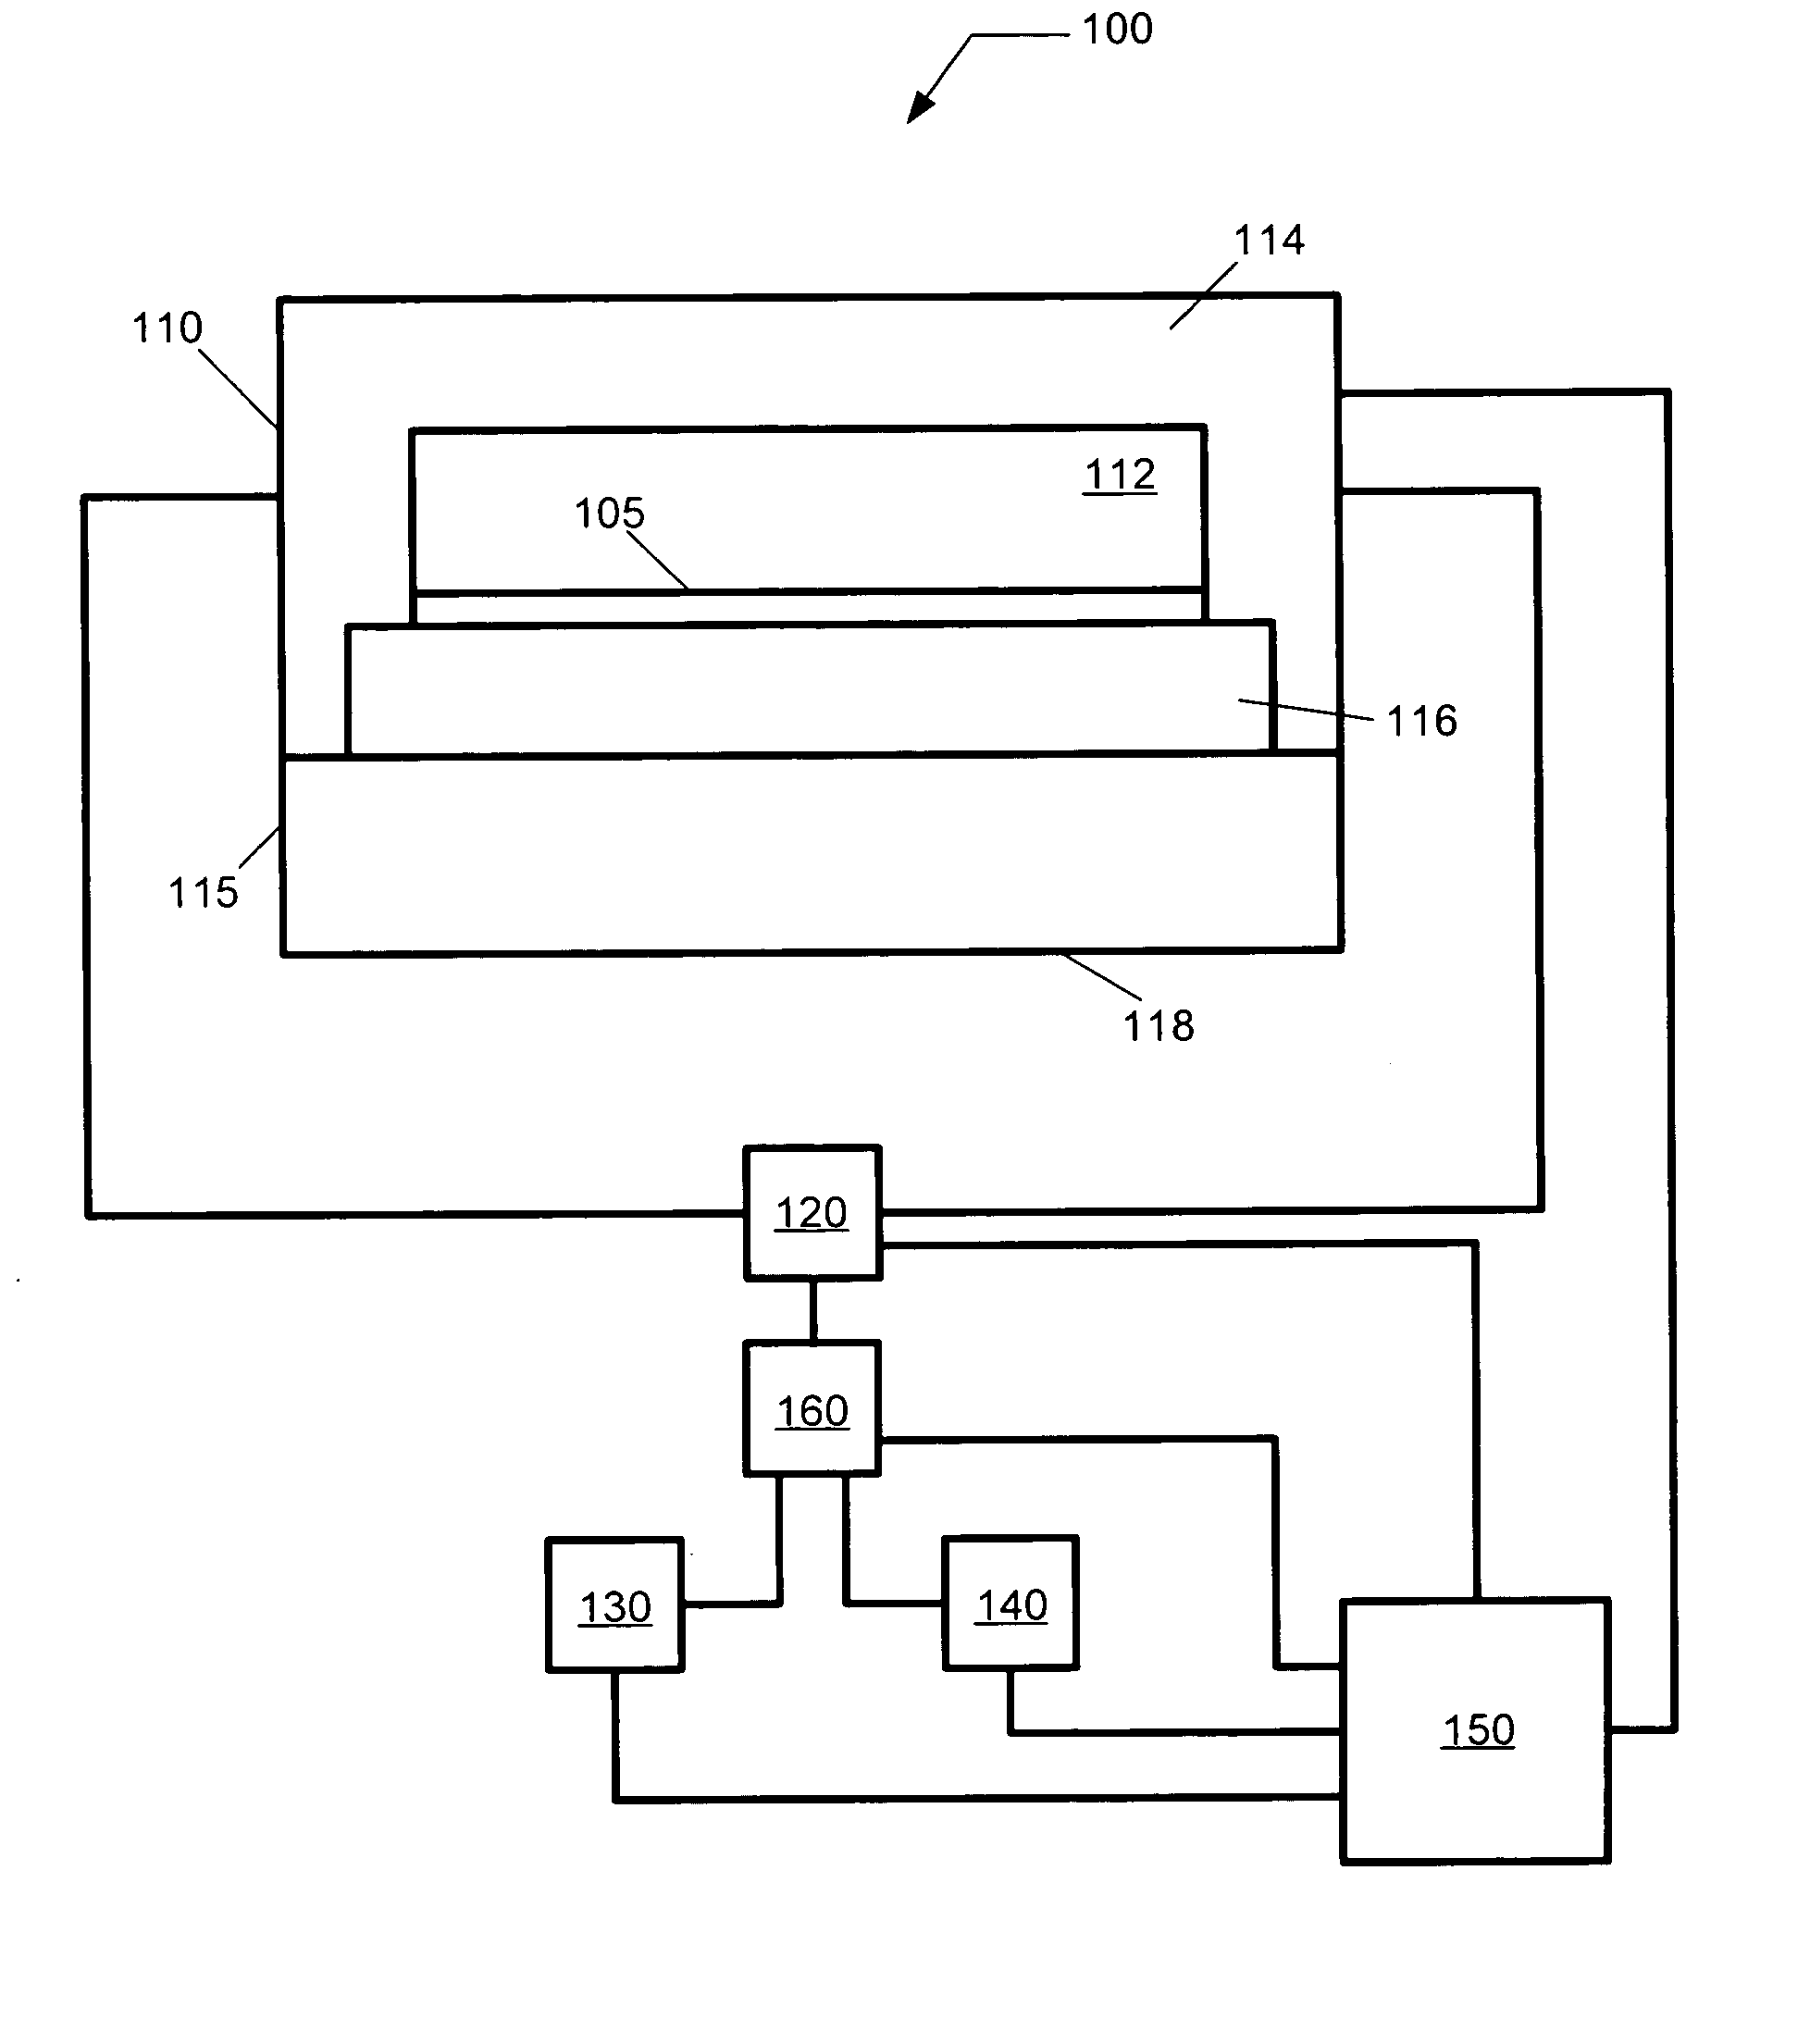 Method and system for homogenization of supercritical fluid in a high pressure processing system